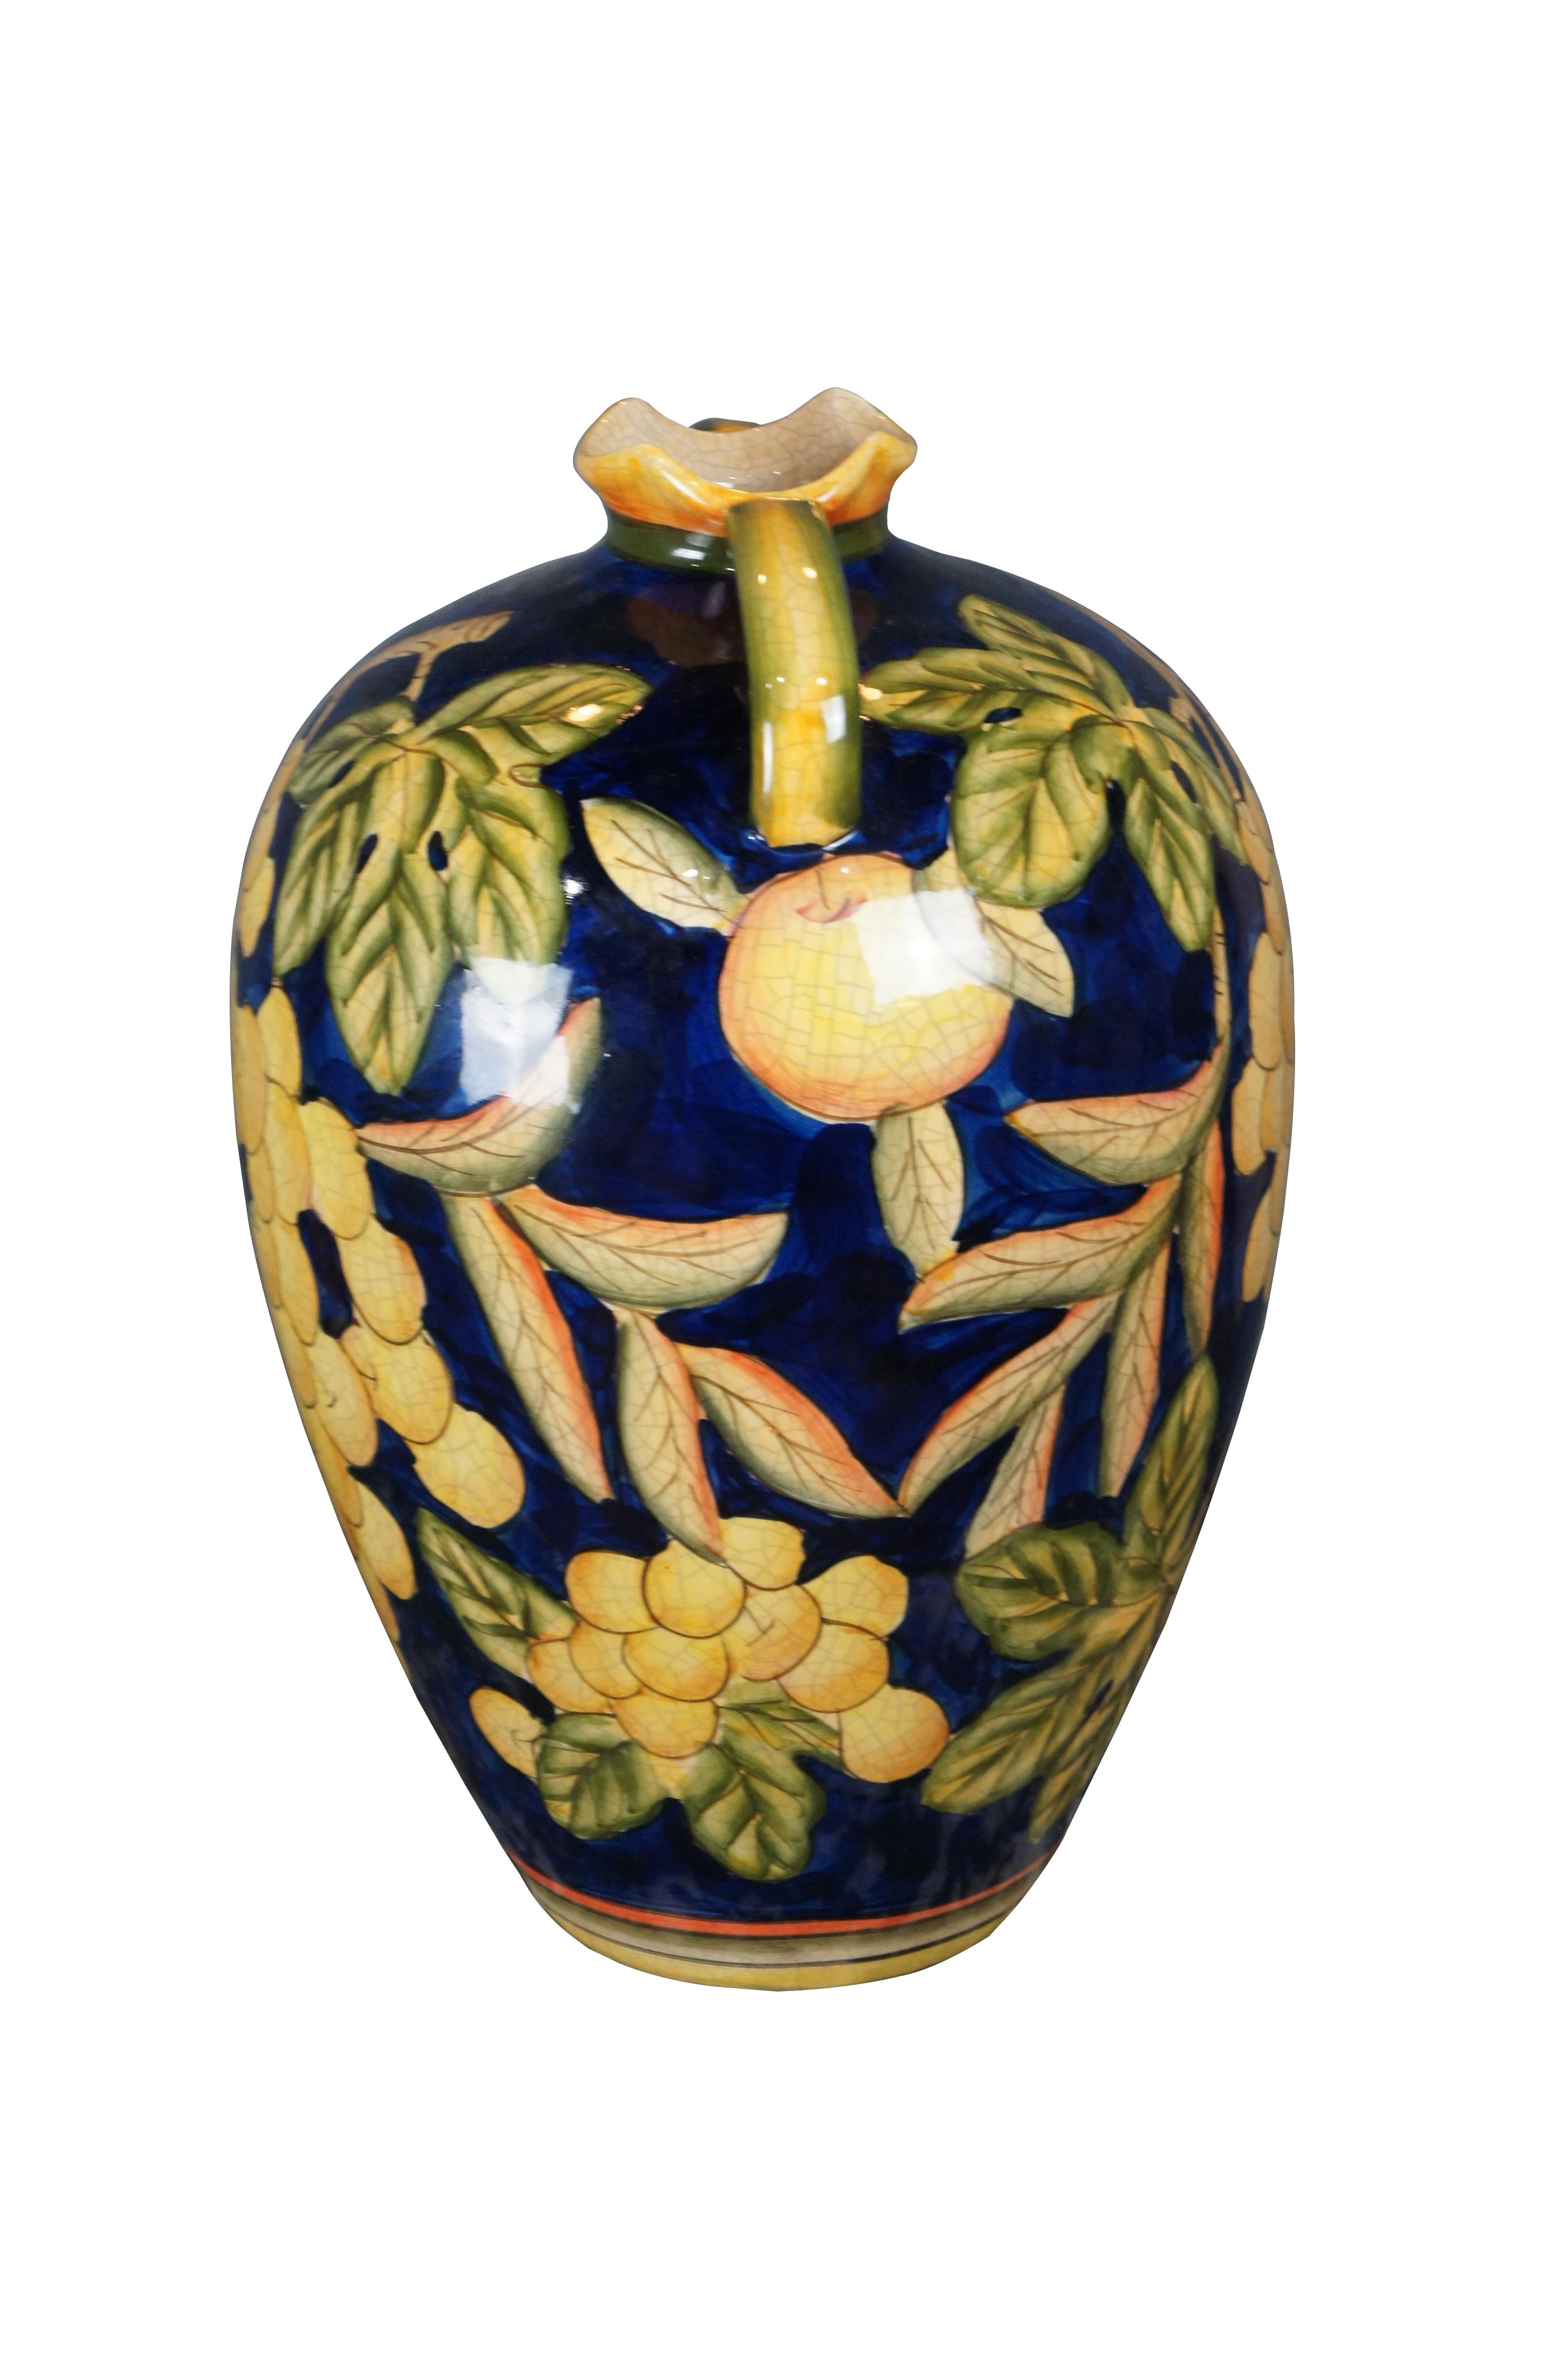 Late 20th century Italian porcelain polychrome handled wine jug. Features a grapevine motif in yellow, blue and green.

Dimensions:
9.5